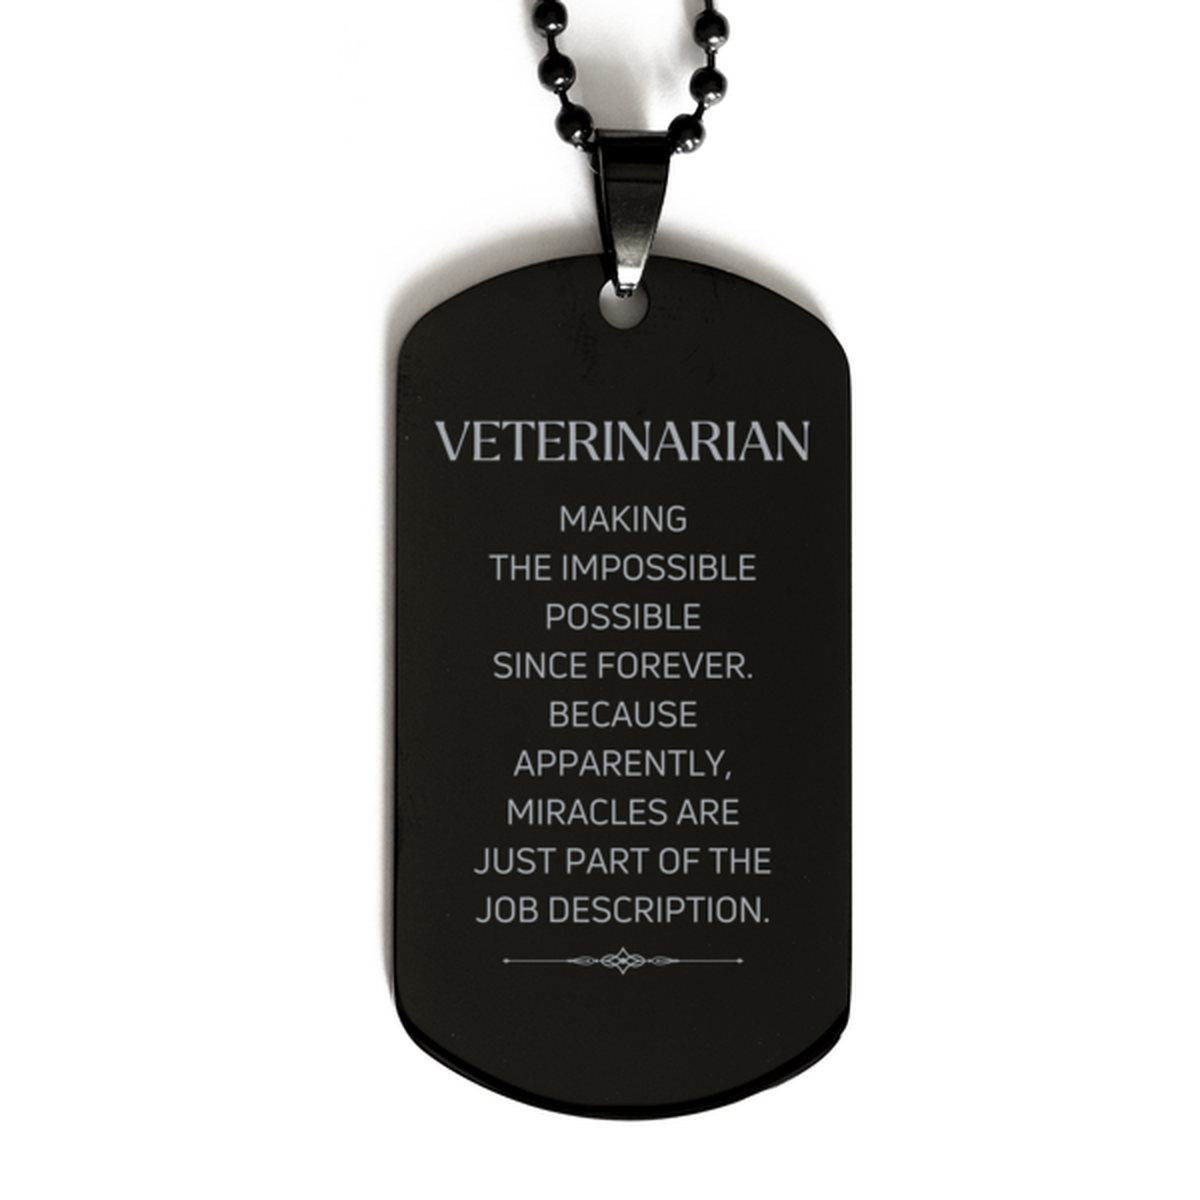 Funny Veterinarian Gifts, Miracles are just part of the job description, Inspirational Birthday Black Dog Tag For Veterinarian, Men, Women, Coworkers, Friends, Boss